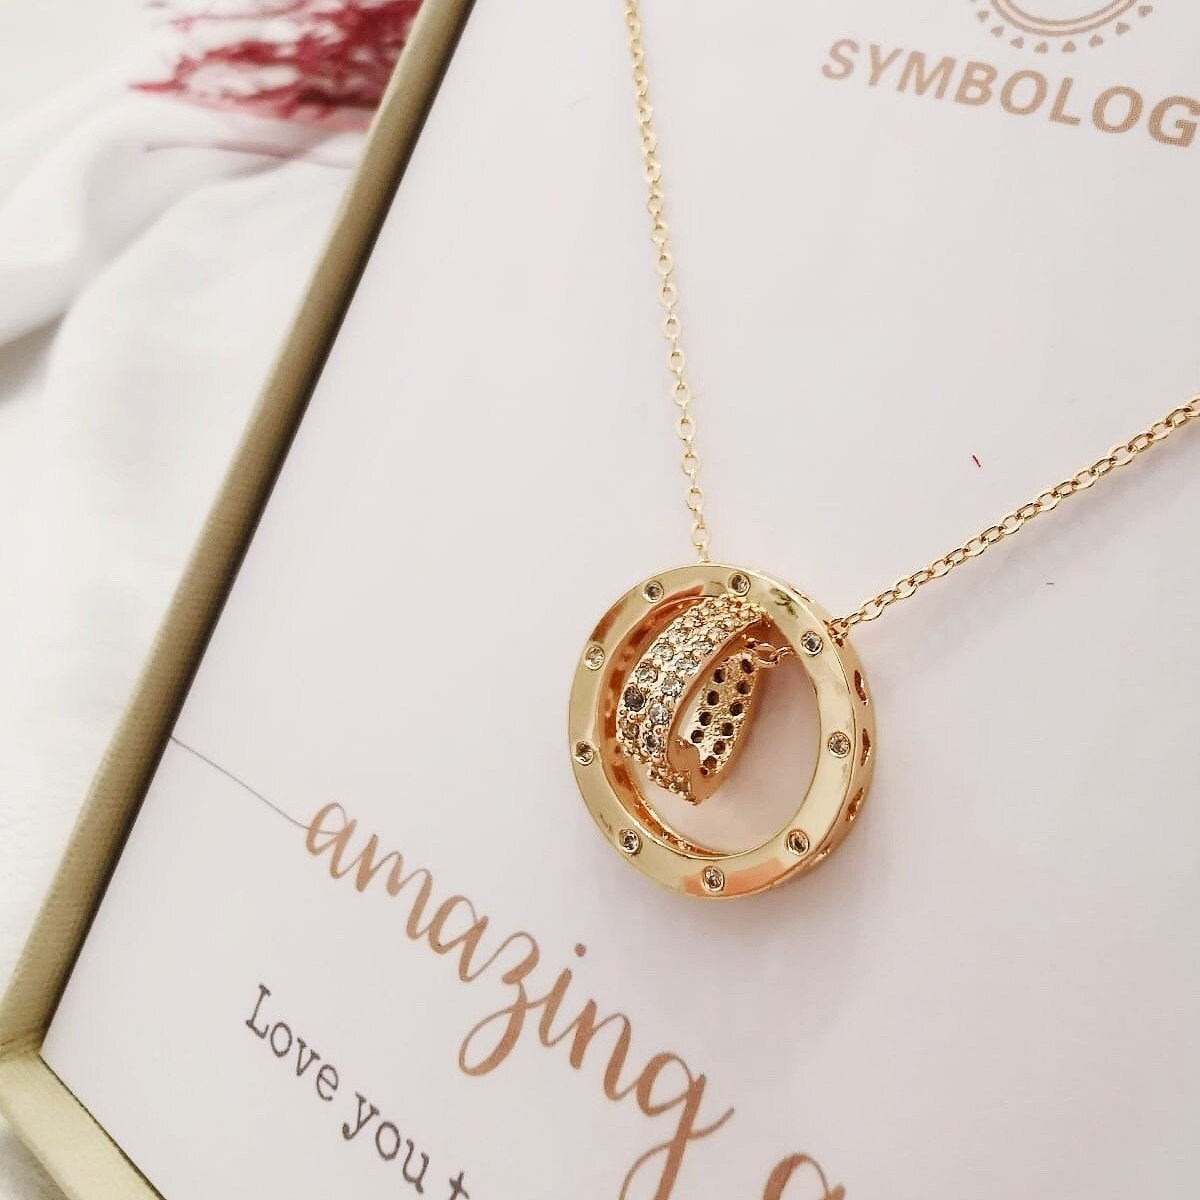 Auntie Gift Necklace / SYMBOLOGY Amazing Auntie CZ Circle Love Heart Necklace / Best Auntie Gift / Gift for Auntie